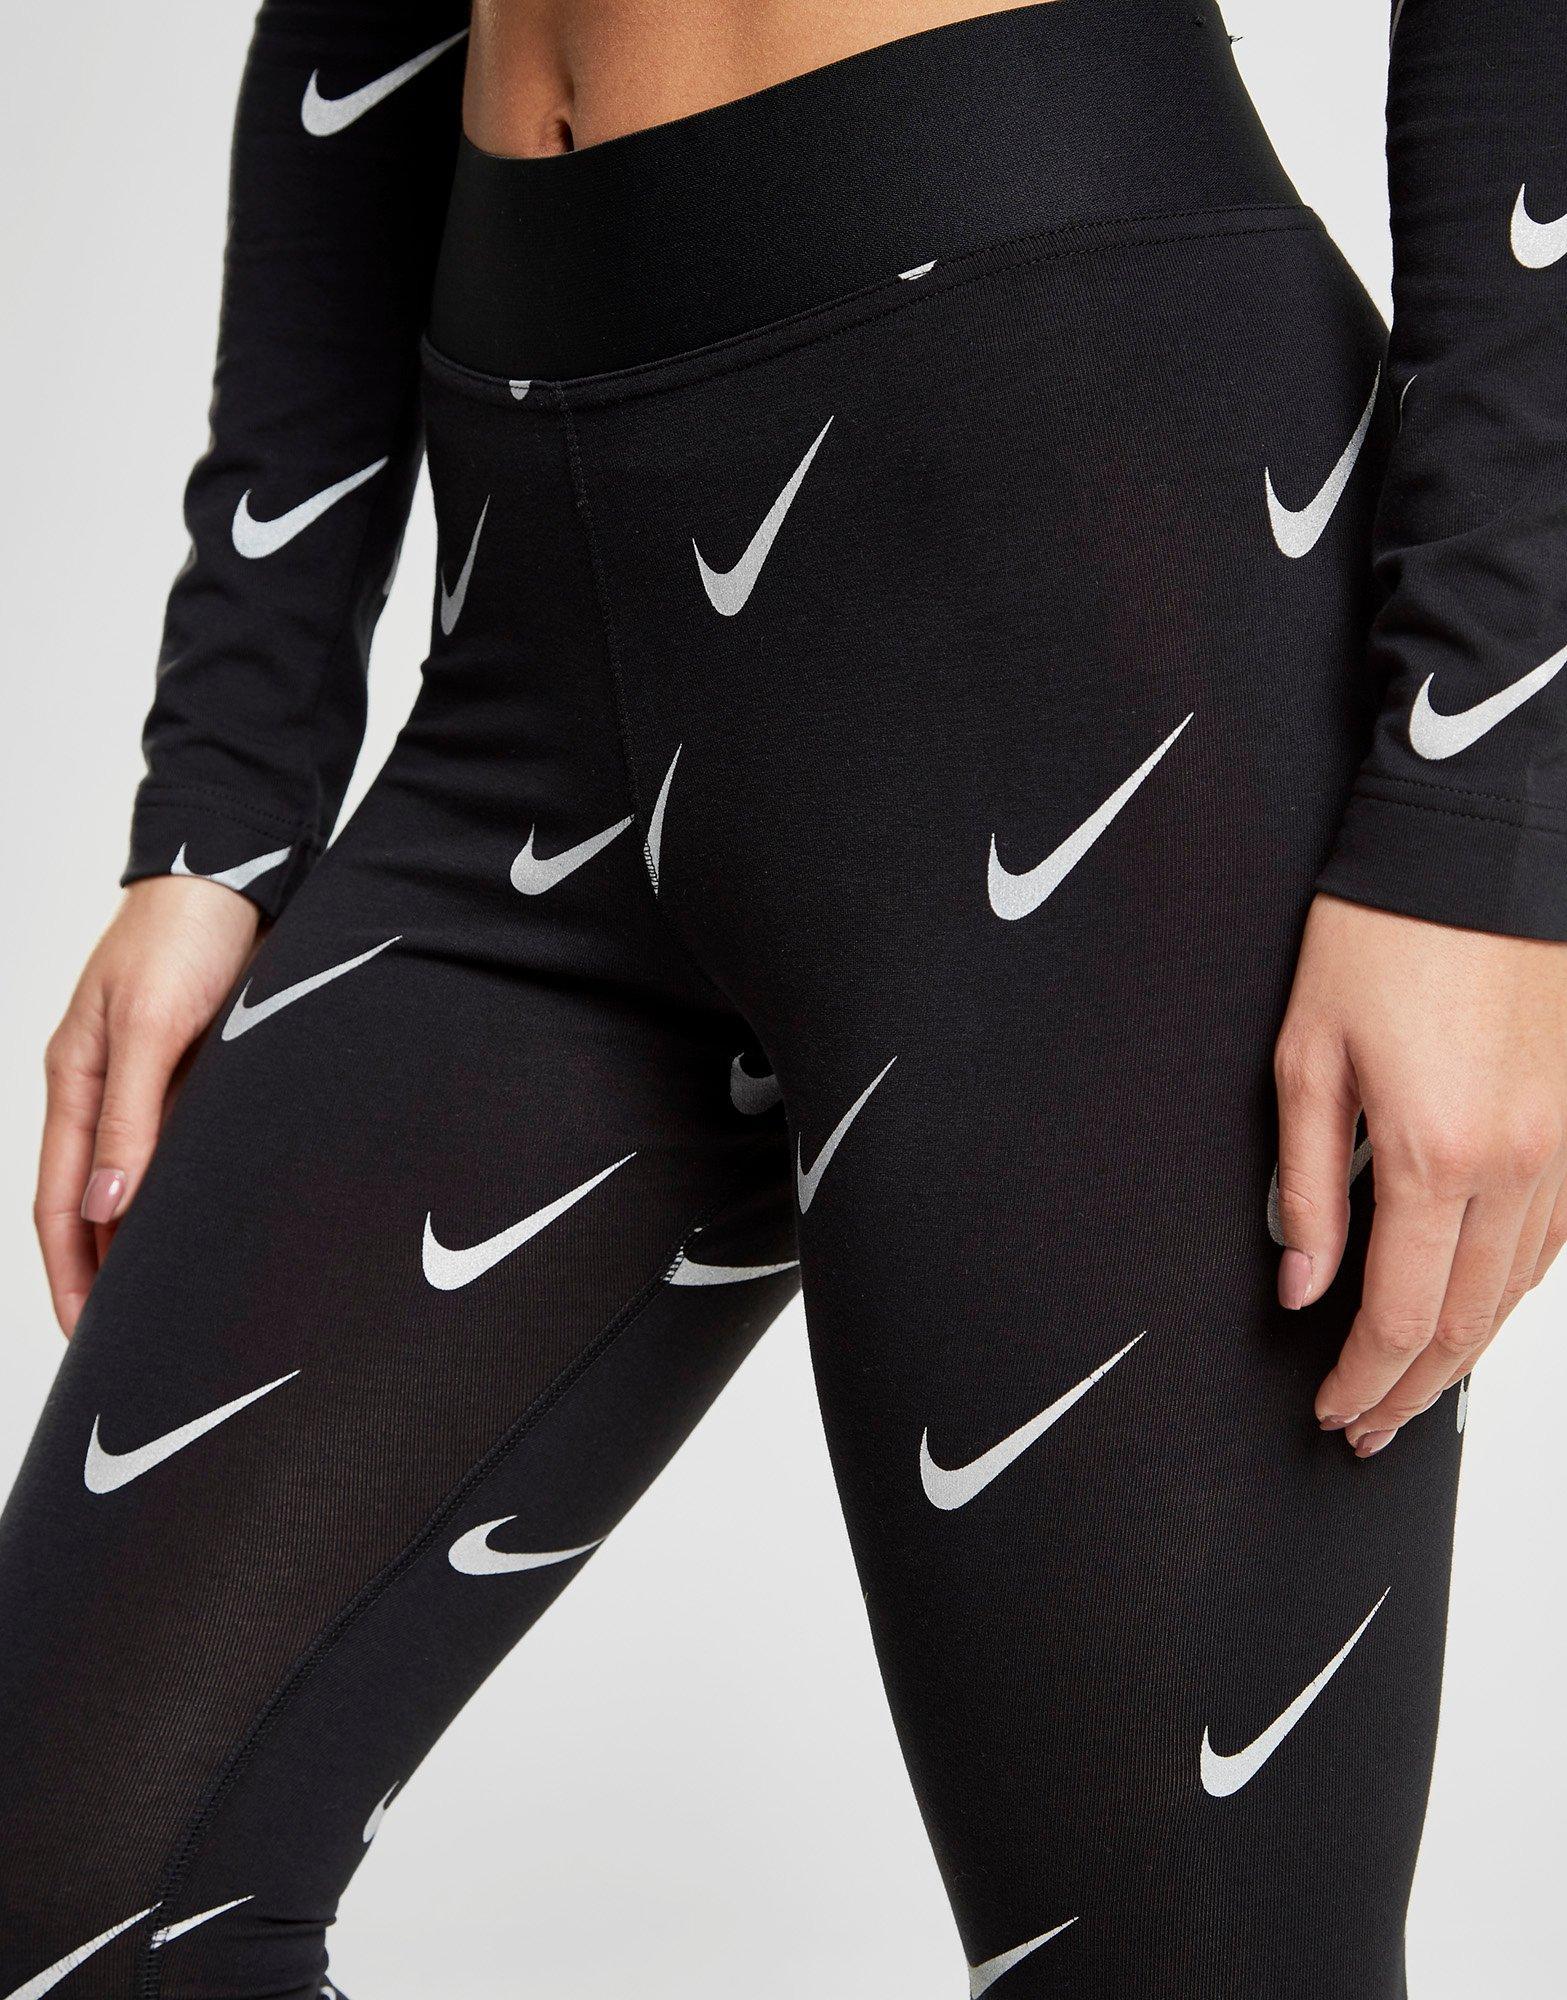 Nike Leggings With Logo All Over Hotsell, SAVE 37% - mpgc.net